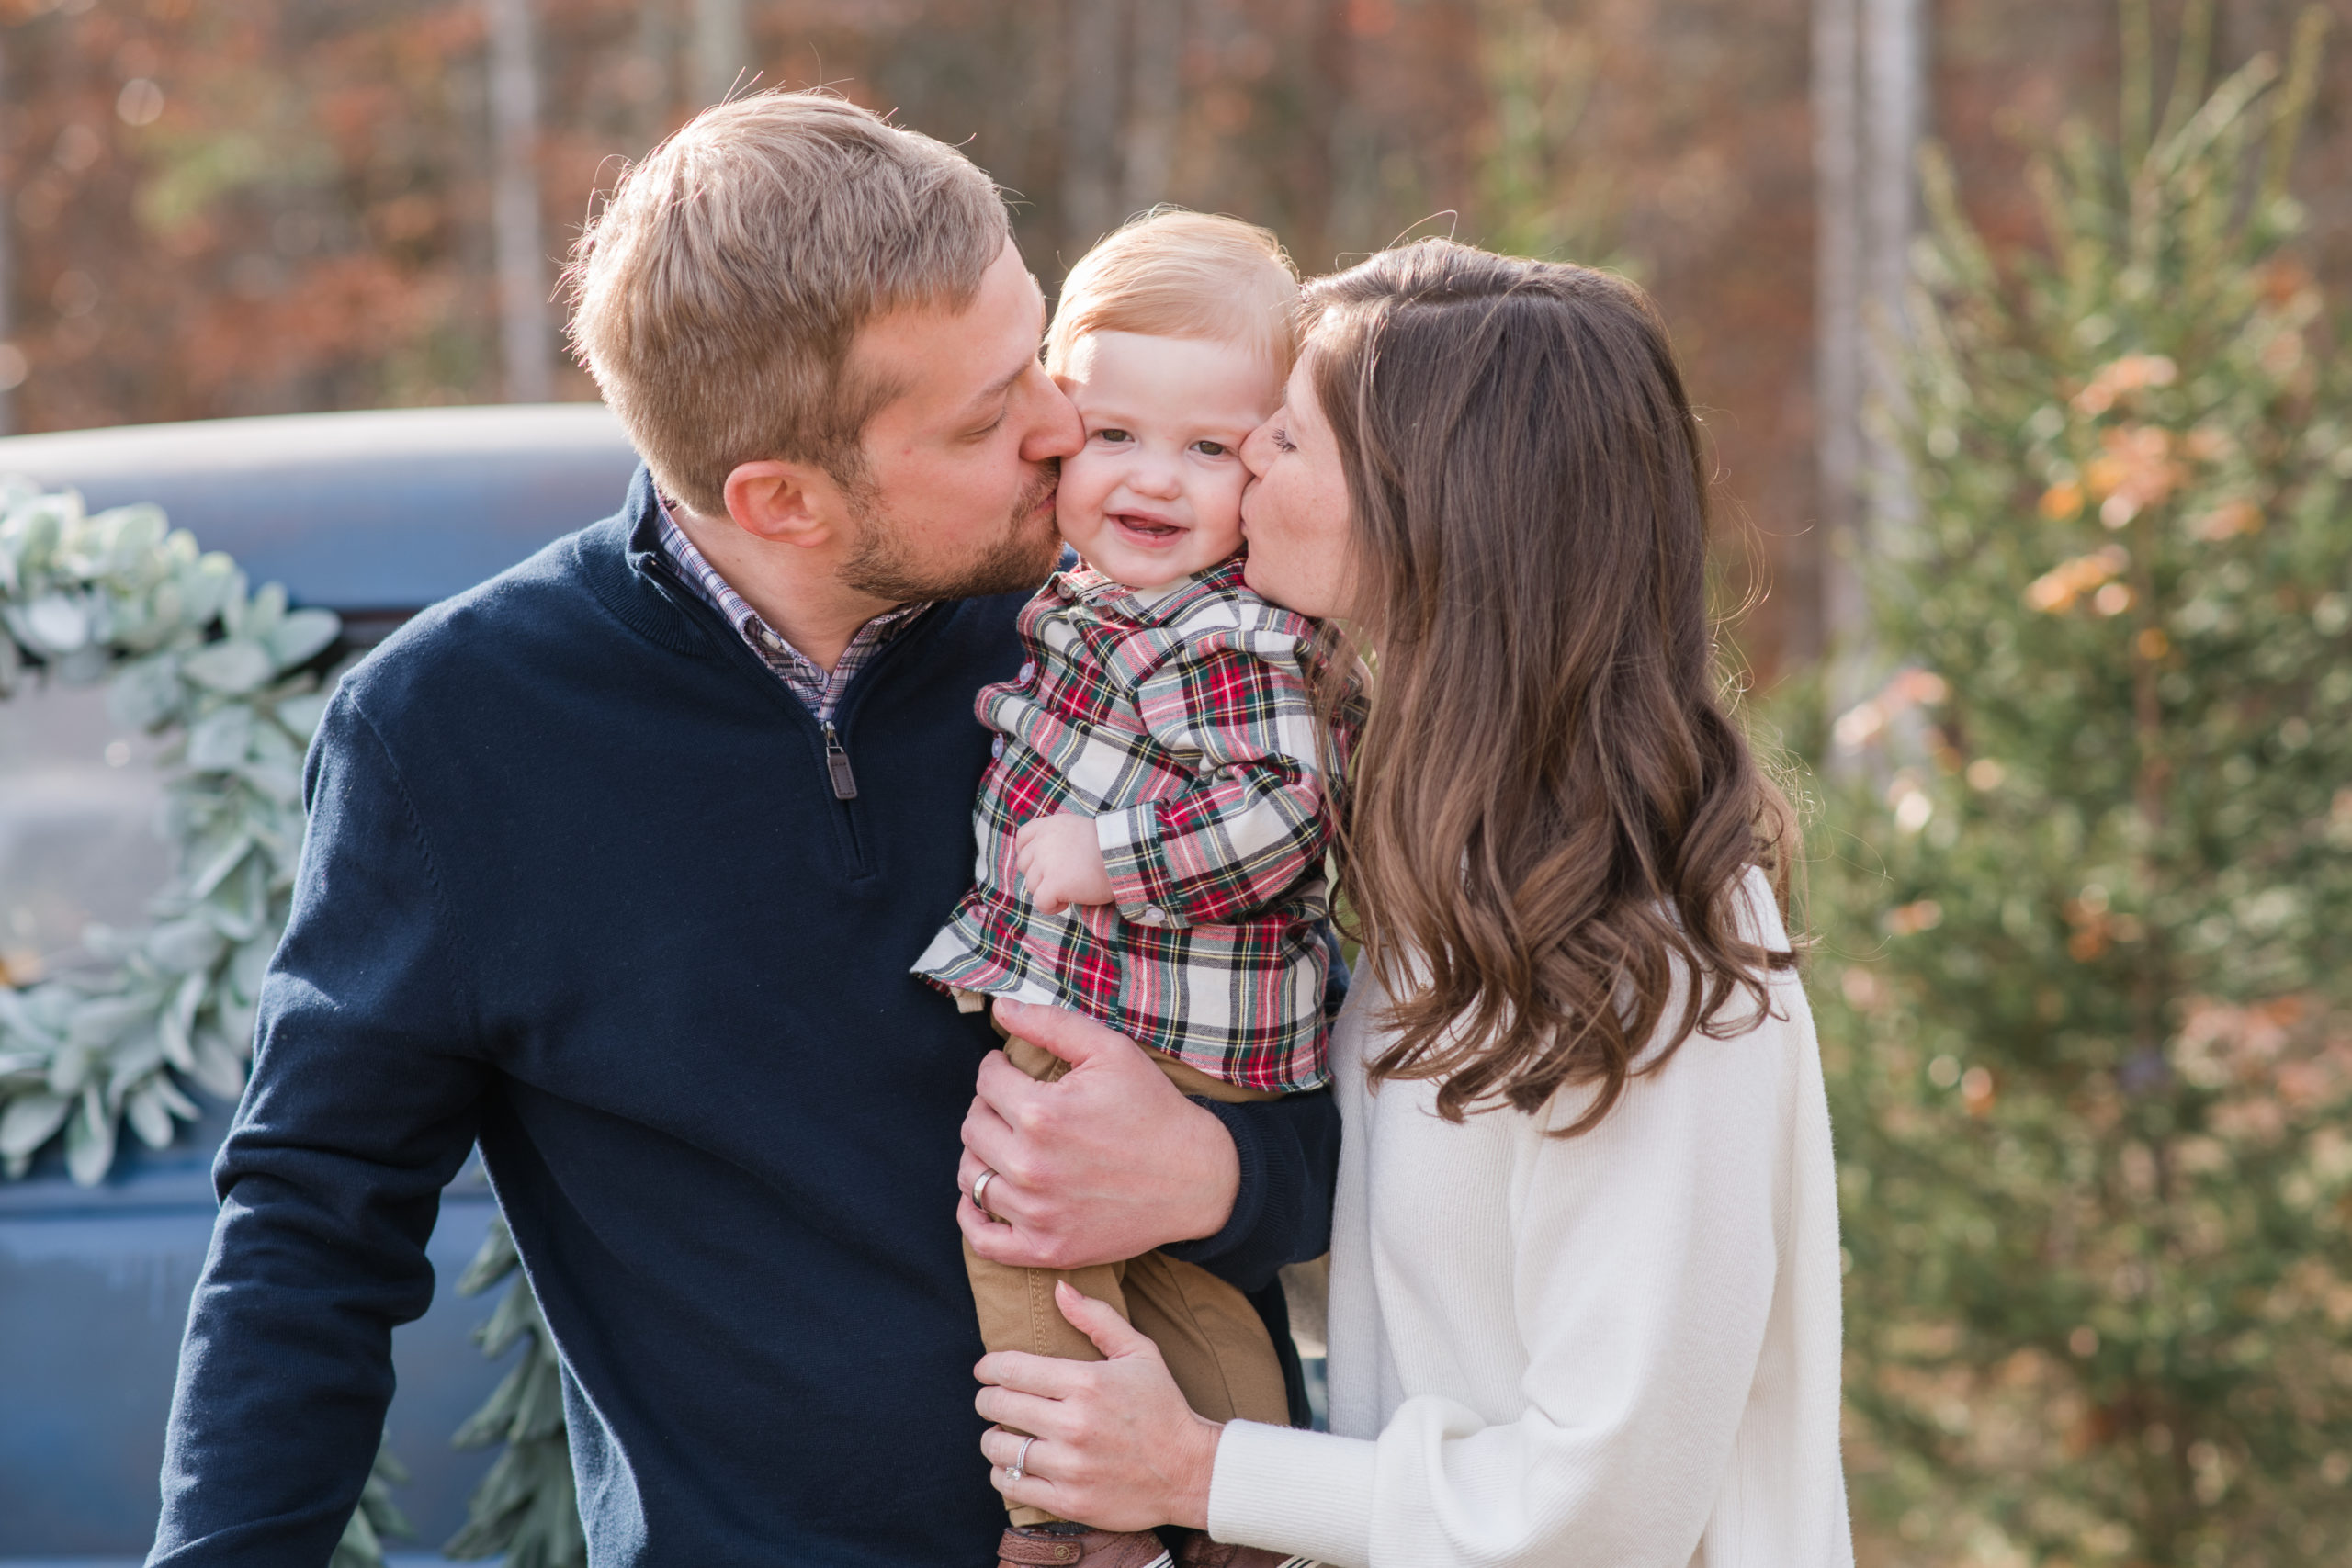 holiday mini sessions for families